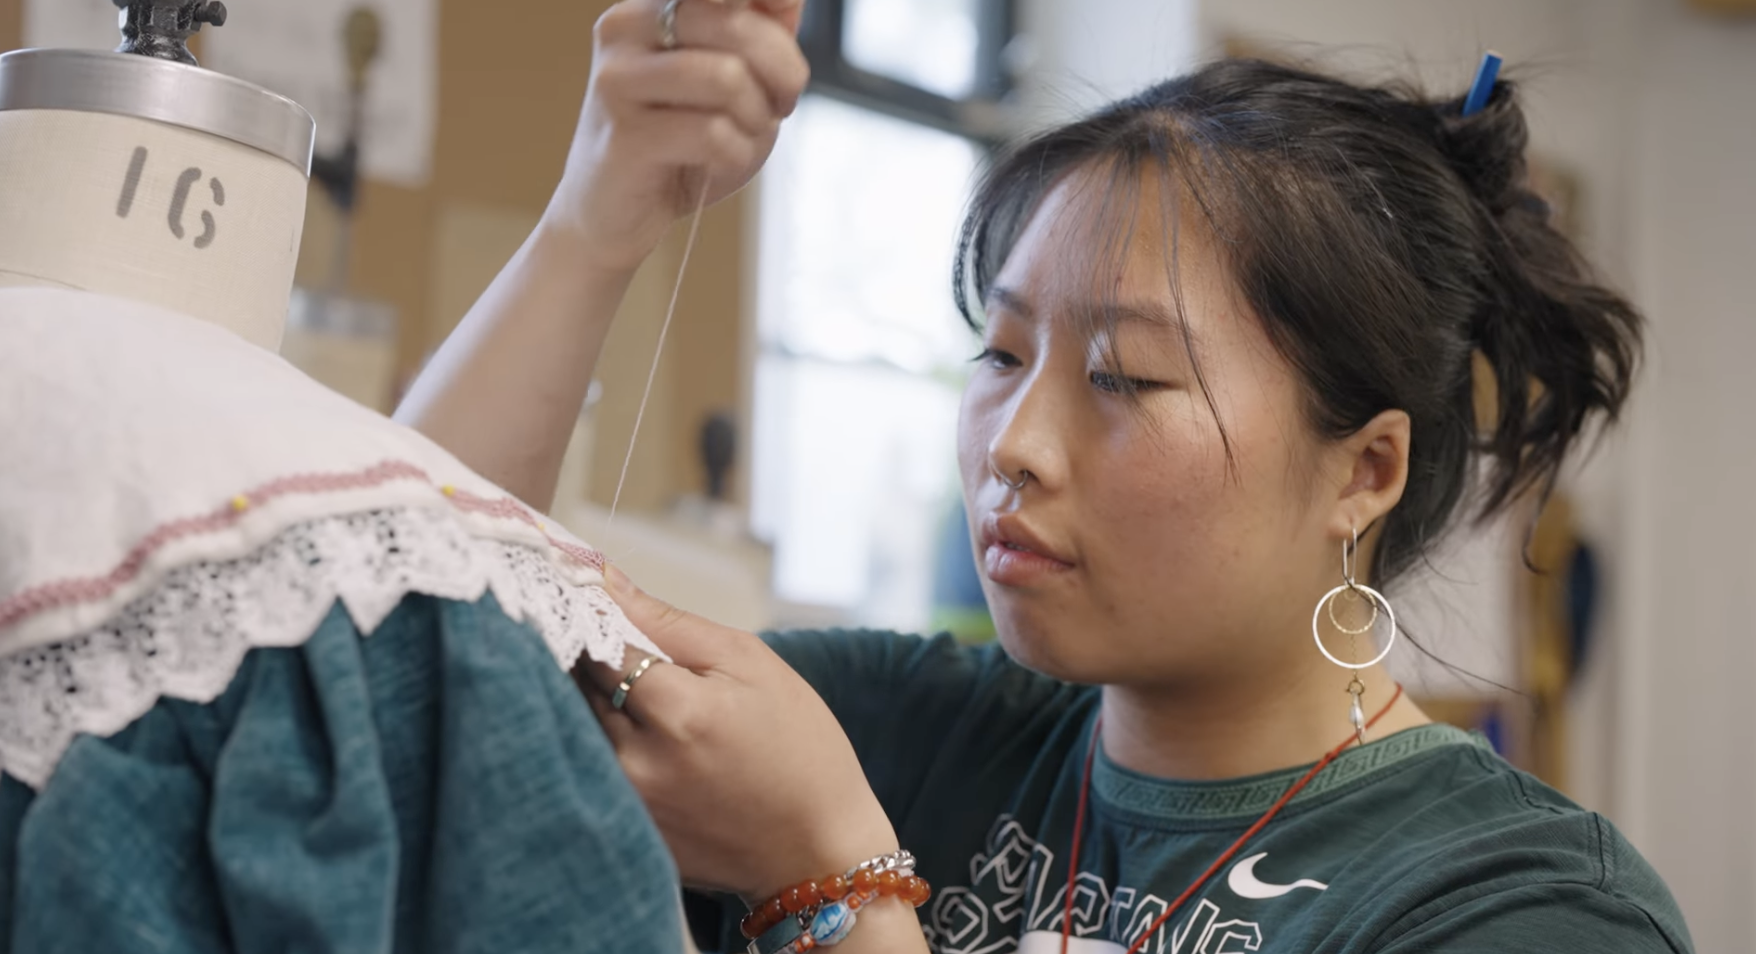 Student Kathrin Poon sews a ruffled color onto a green dress